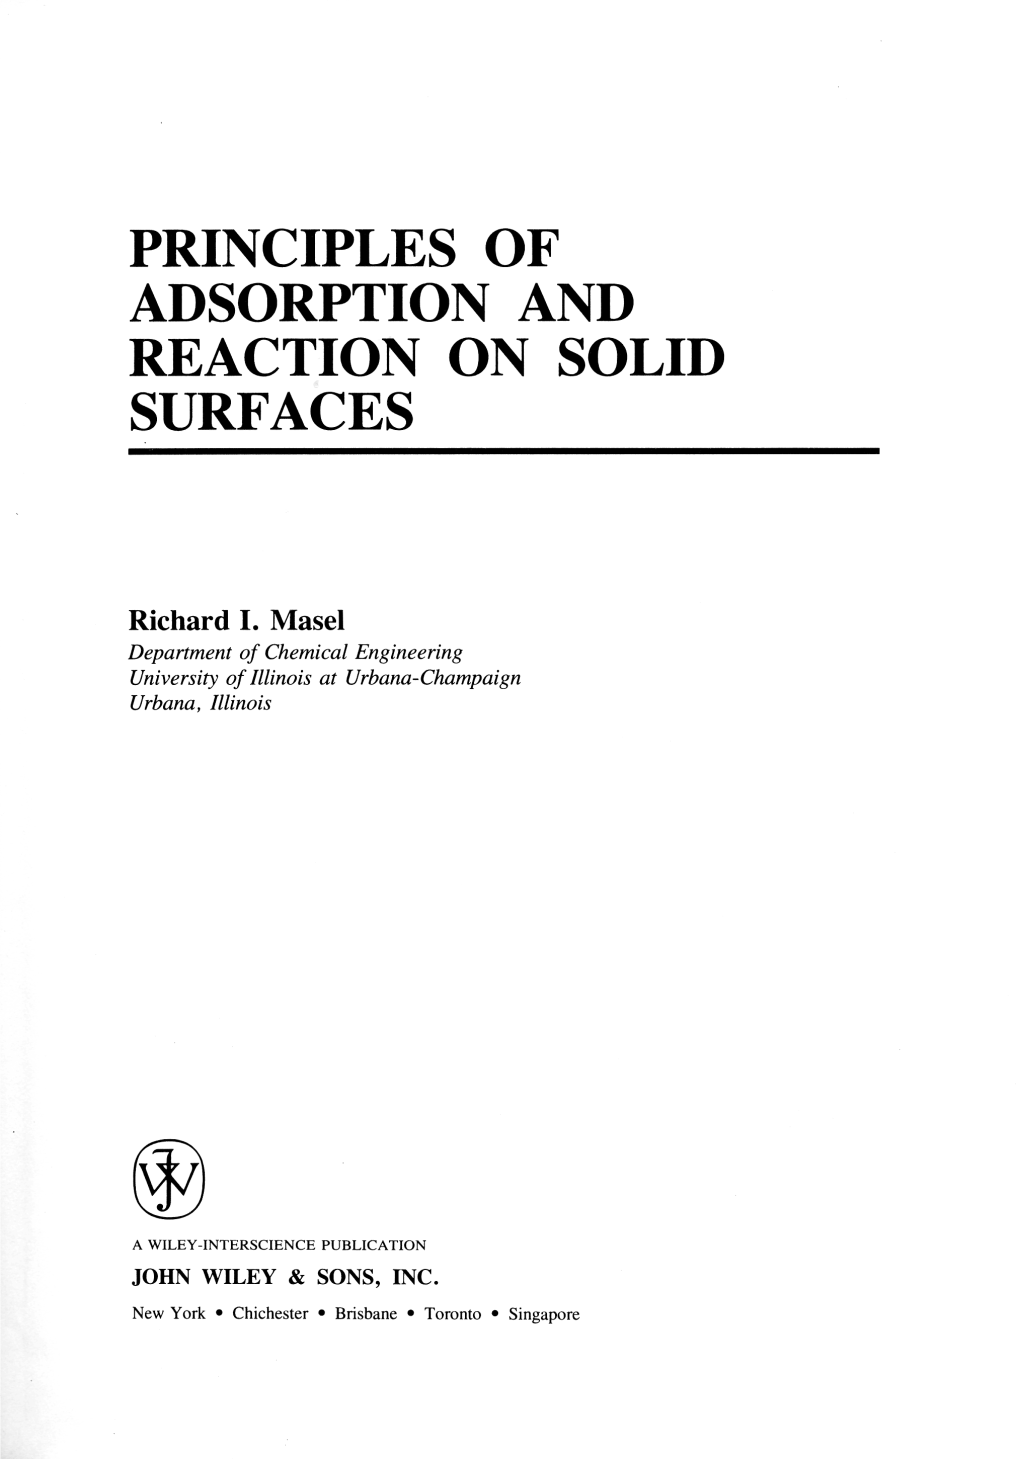 Principles of Adsorption and Reaction on Solid Surfaces